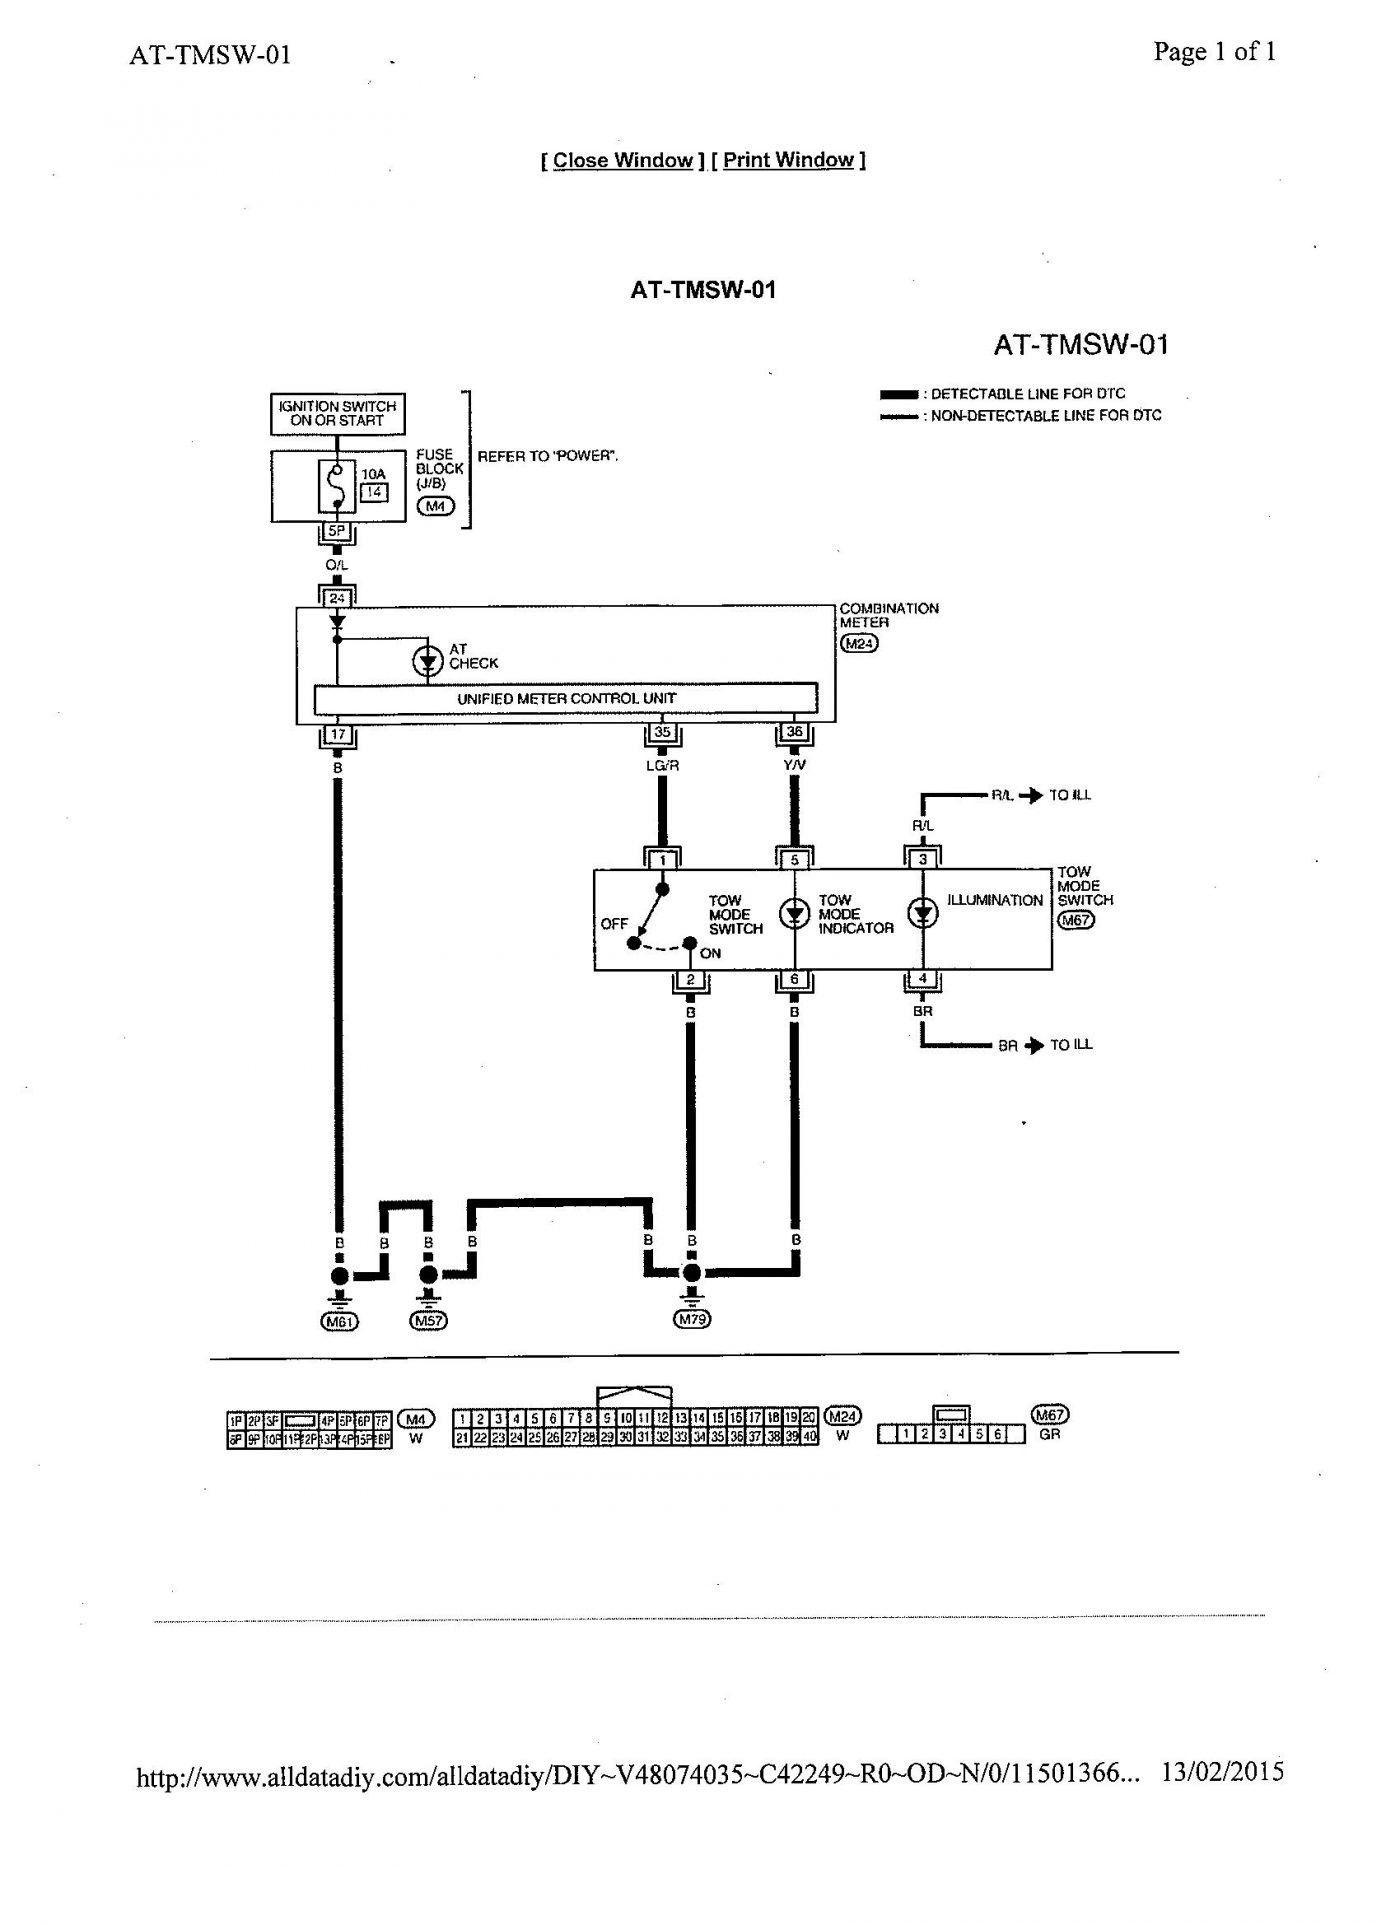 Double Pole Toggle Switch Wiring Diagram Fresh Spdt Toggle Switch Wiring Diagram Download